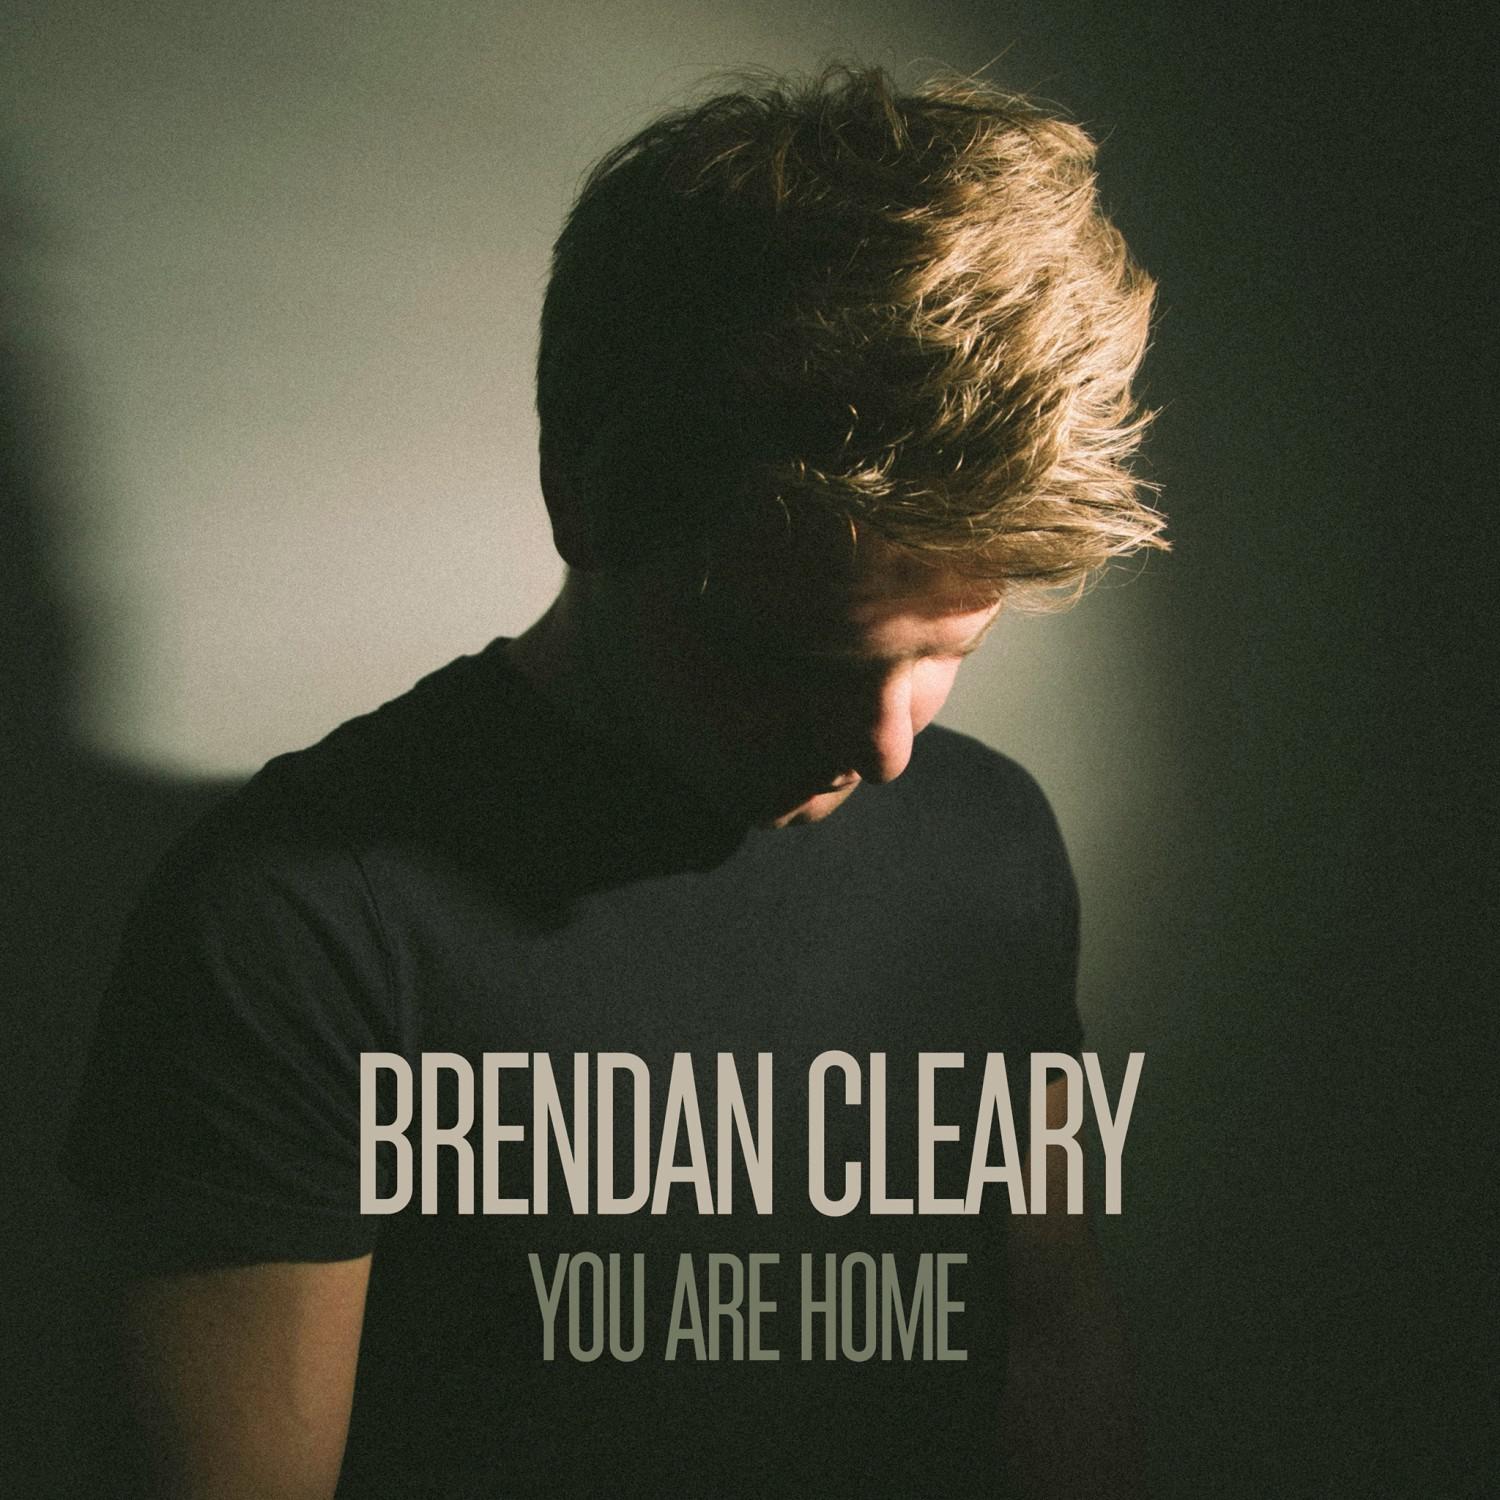 Brendan Cleary - You Are Home